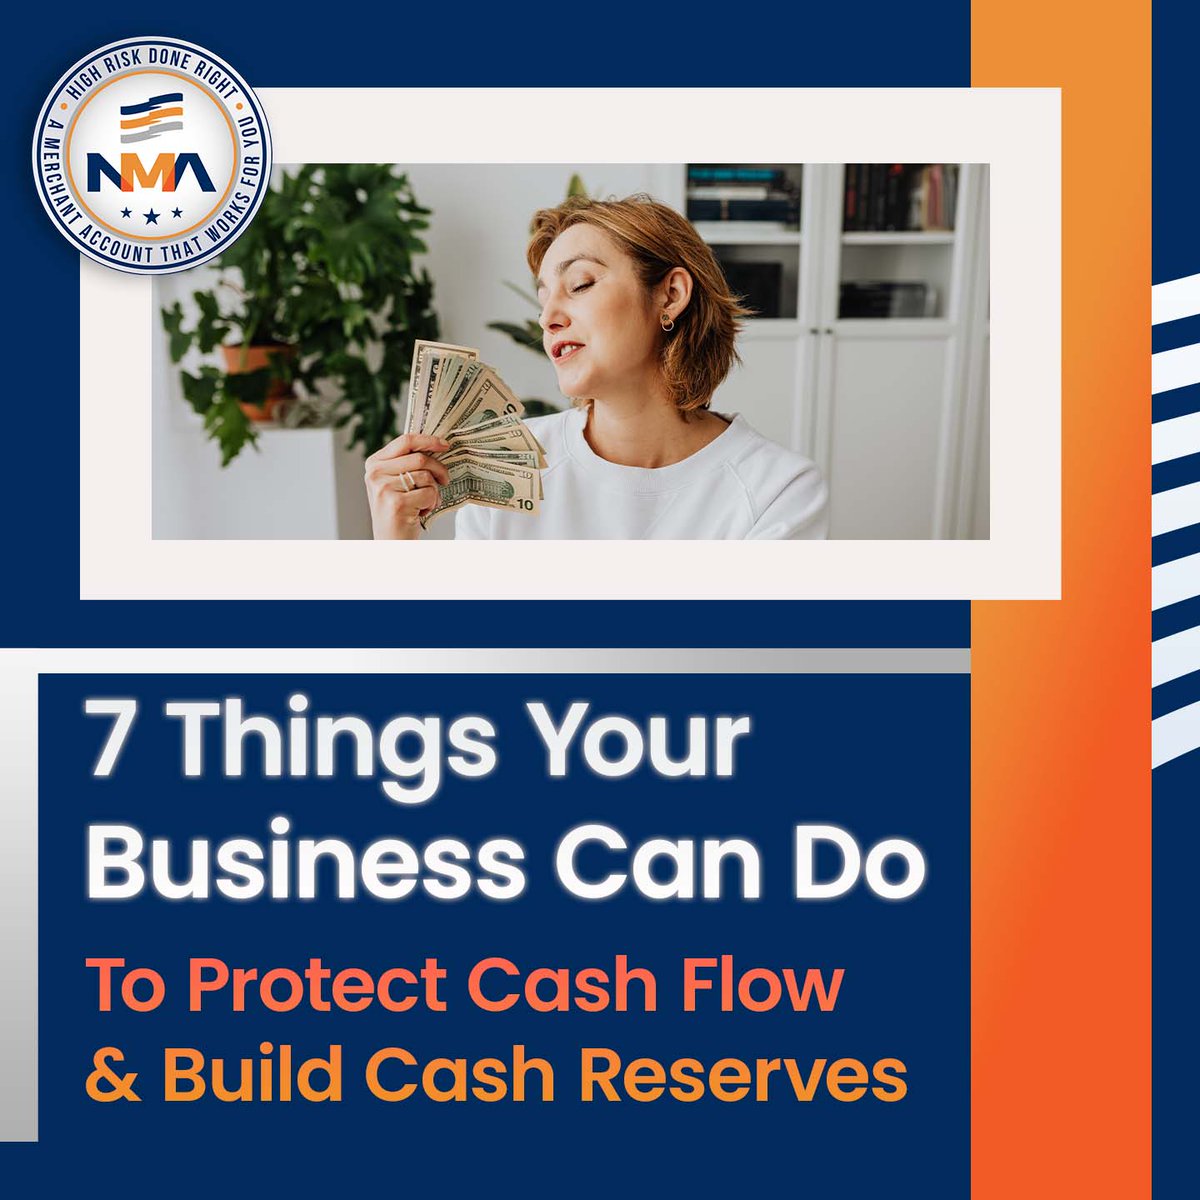 Your cash should stay yours! Here is now you can plan ahead to keep cash flow steady and reserves full!👇 

bit.ly/3FFOouI

#cashflow #cashreserves #weworkforyou #merchantservices #paymentprocessing